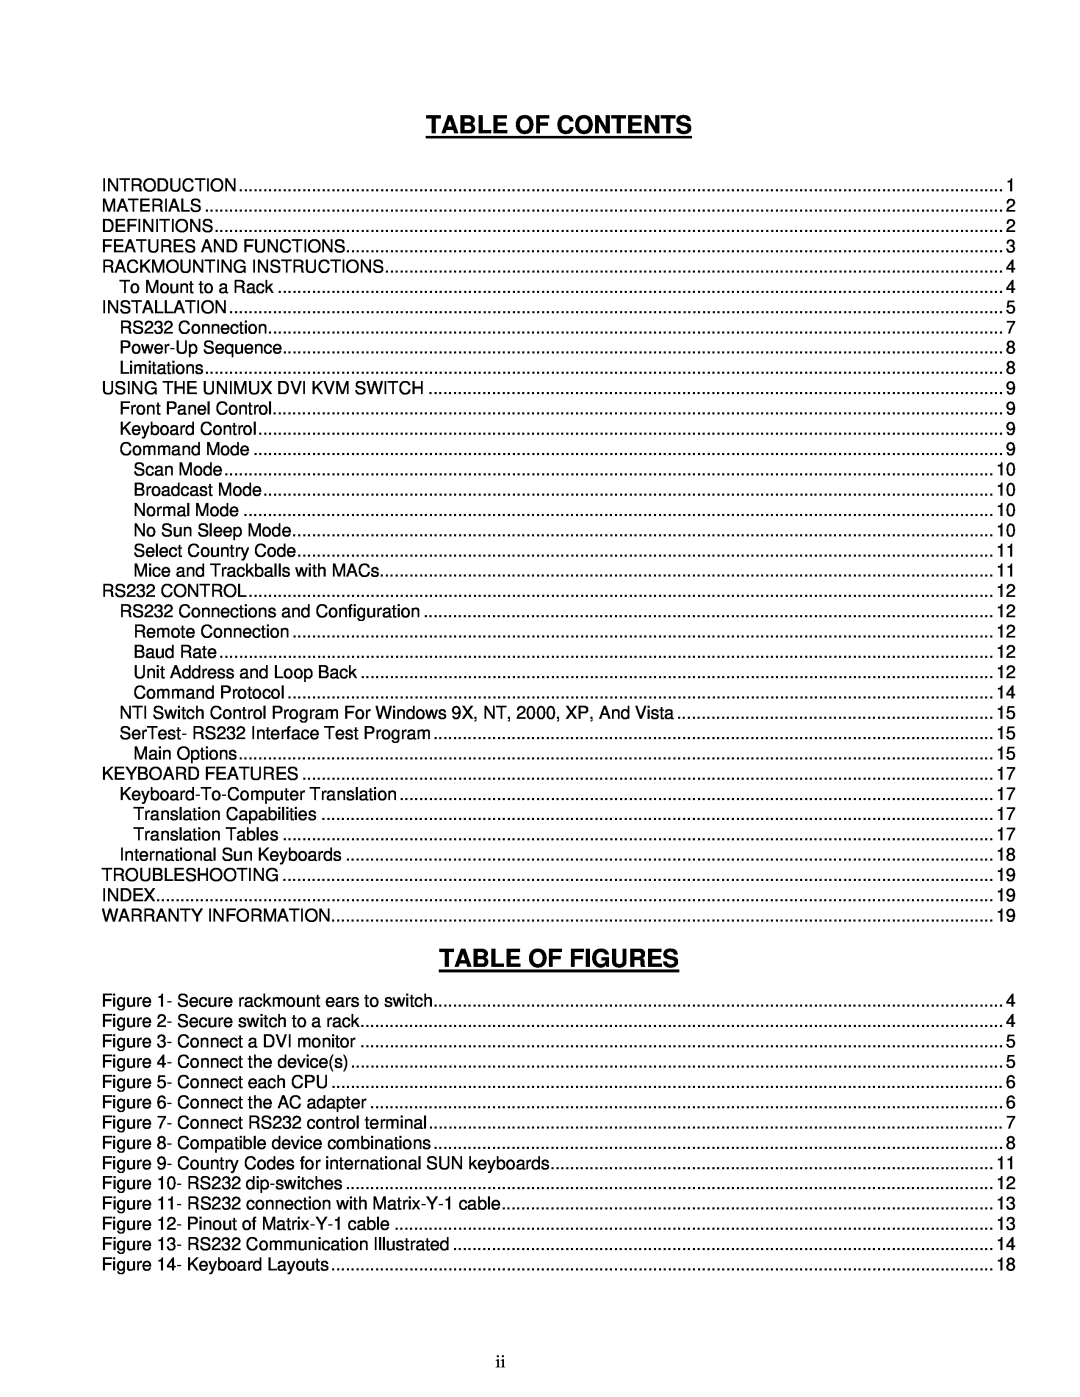 Network Technologies DVI-x operation manual Table Of Contents, Table Of Figures 